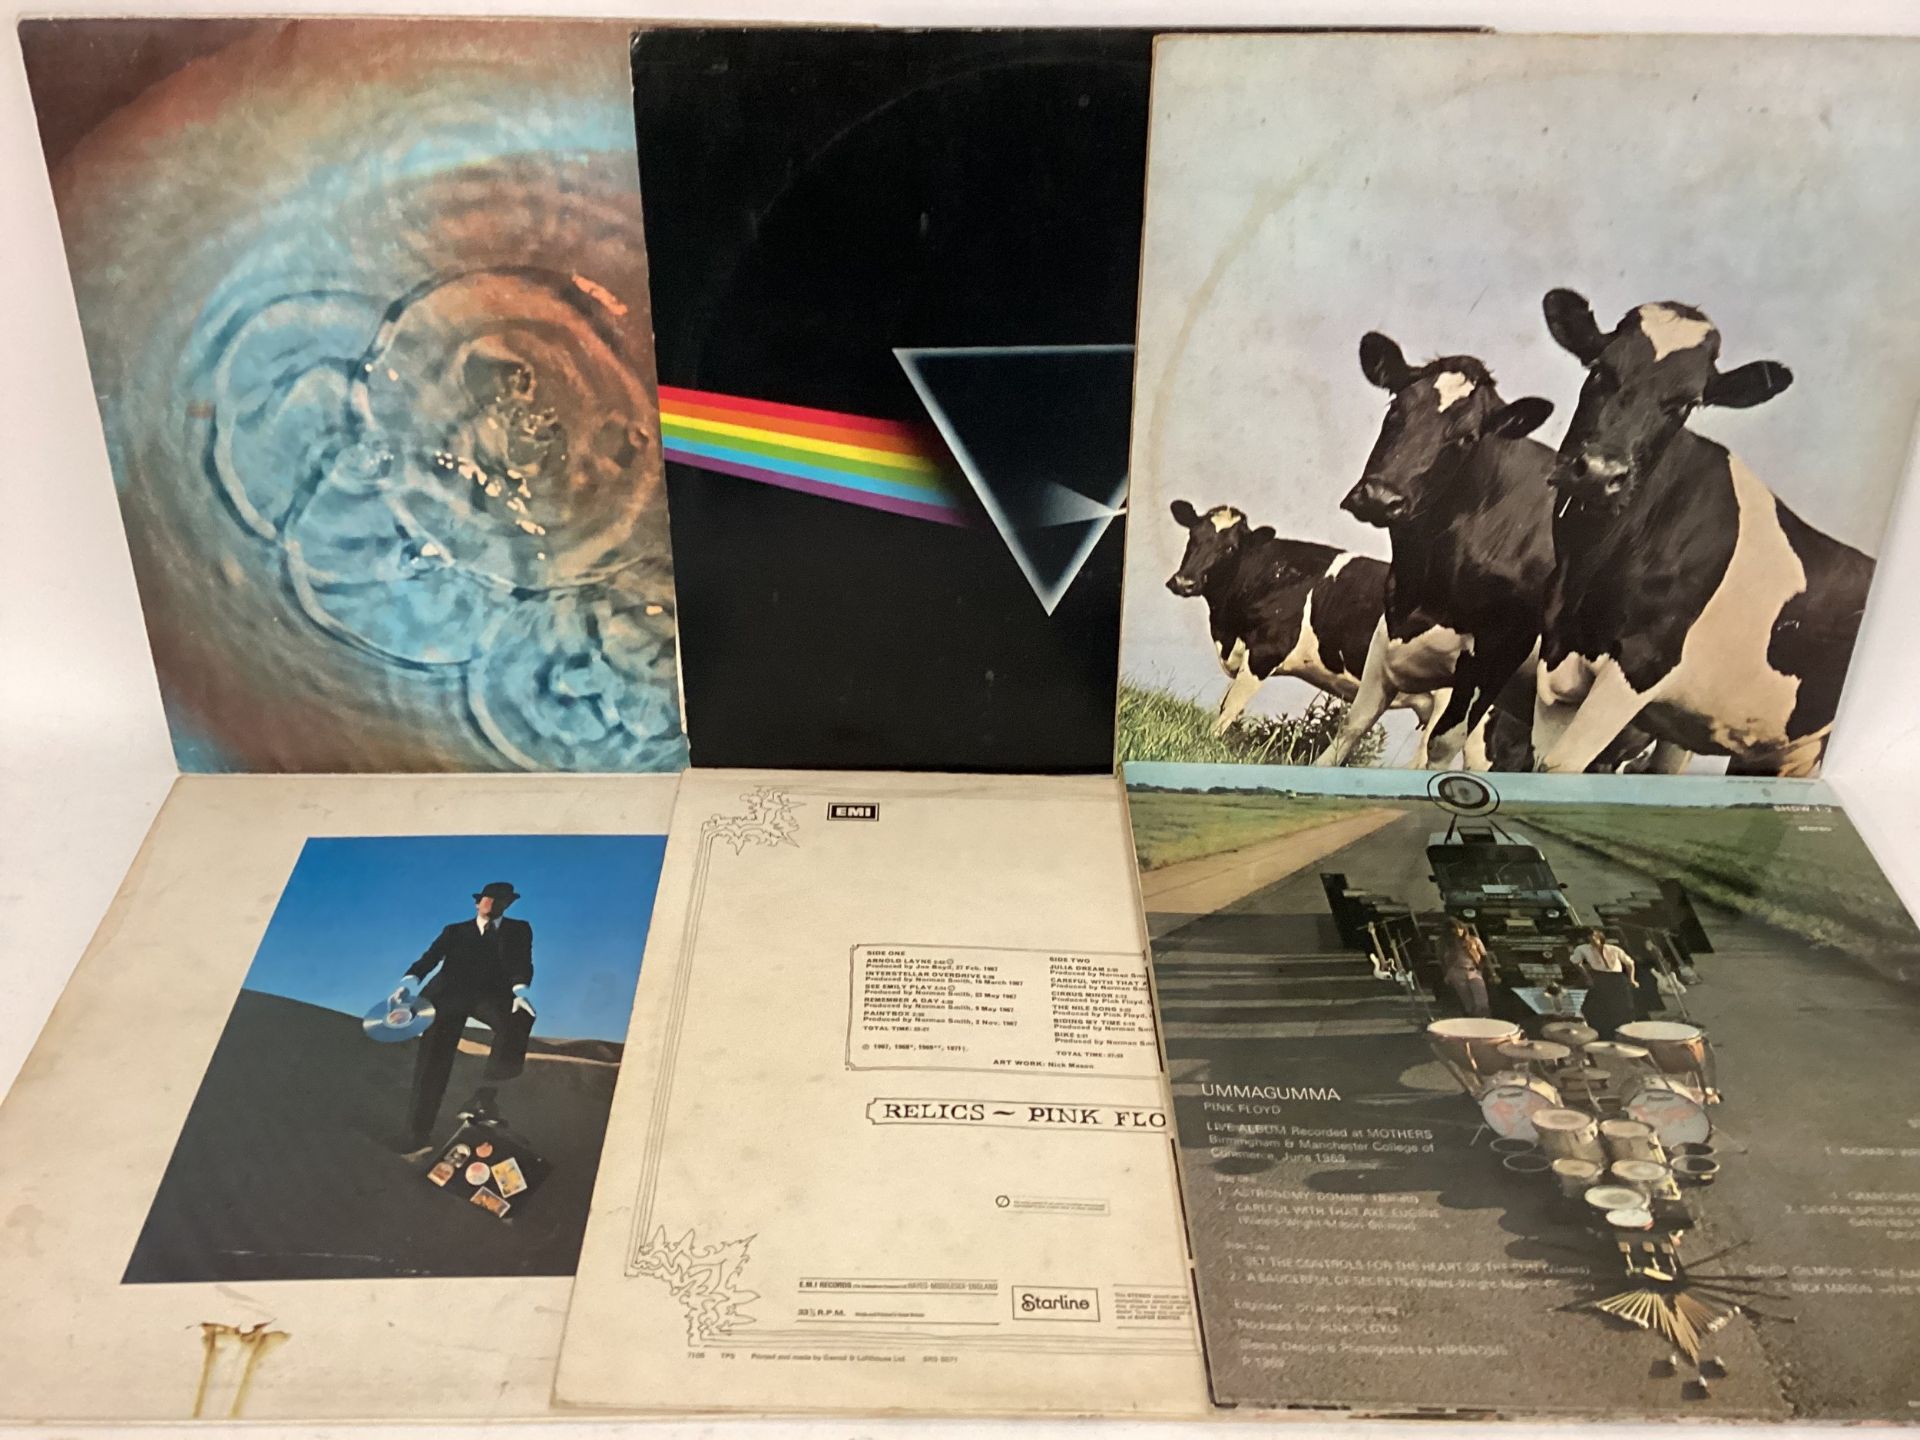 PINK FLOYD VINYL LP RECORDS X 6. Titles here include - Meddle in Gatefold textured sleeve SHVL 795 - Image 2 of 4